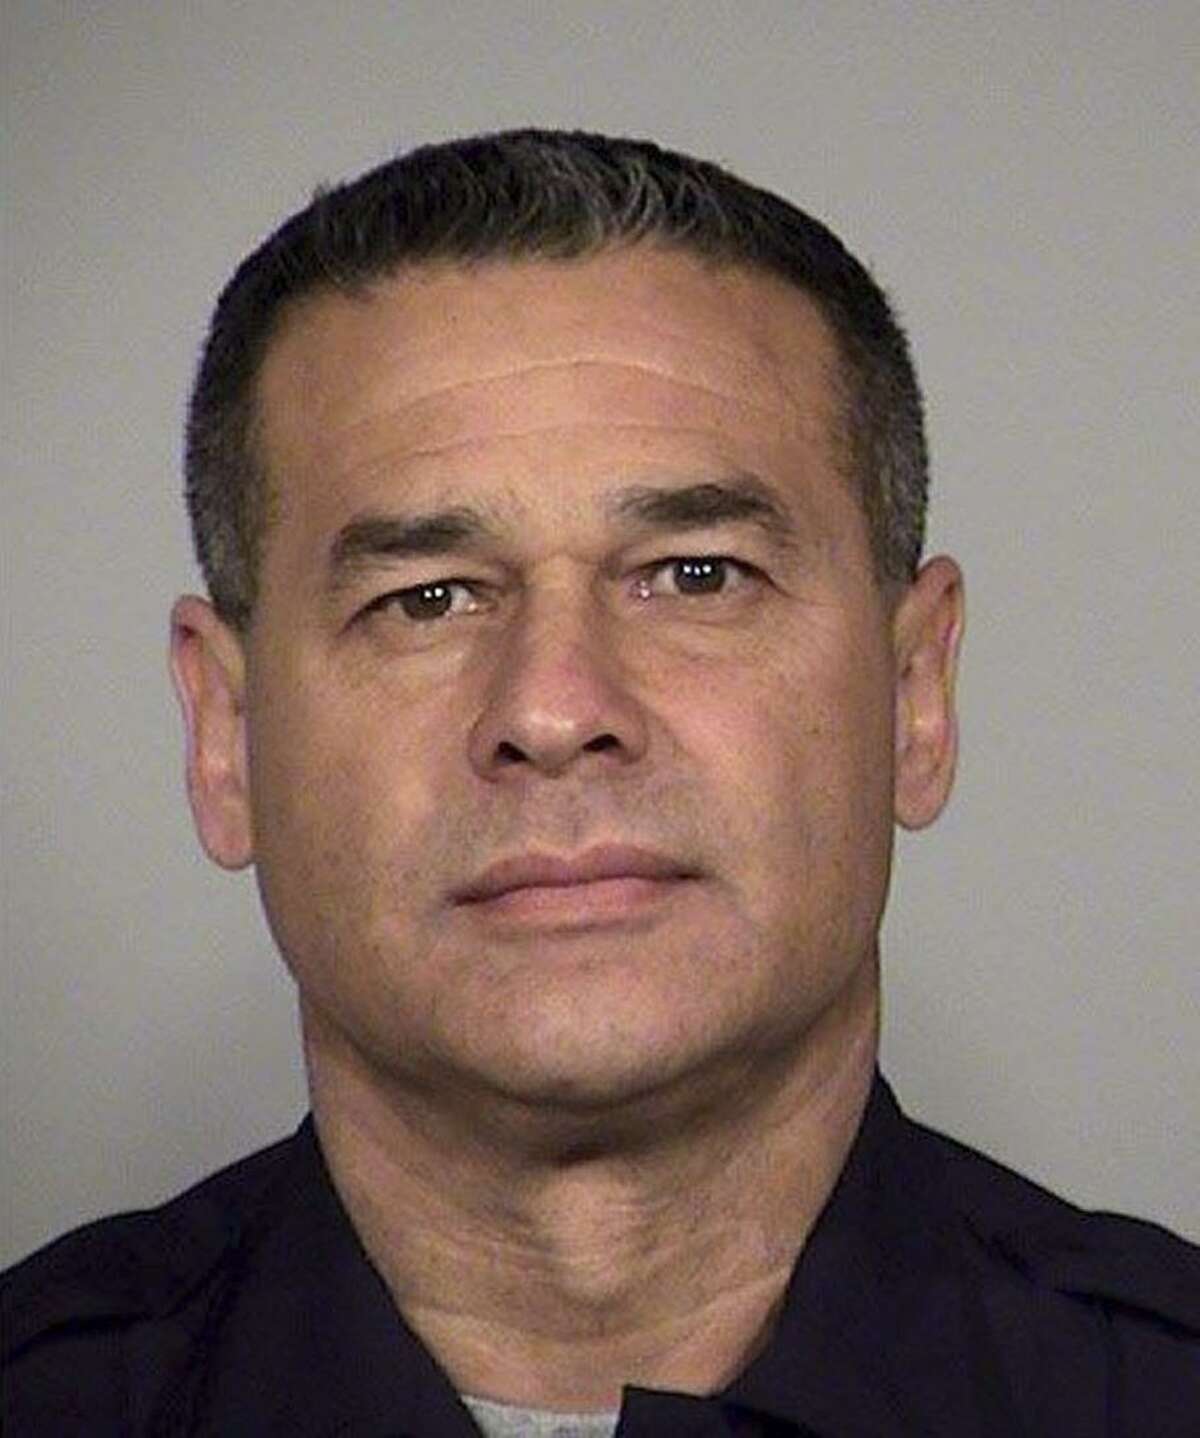 In an undated handout photo, Det. Benjamin Marconi of the San Antonio police department. Det. Marconi, who was shot to death while sitting in a squad car, was apparently killed just for being on the force, the city?’s police chief said on Monday, a day after the detective and three officers were shot in separate episodes around the country. (San Antonio Police Department via The New York Times) ?— FOR EDITORIAL USE ONLY ?—